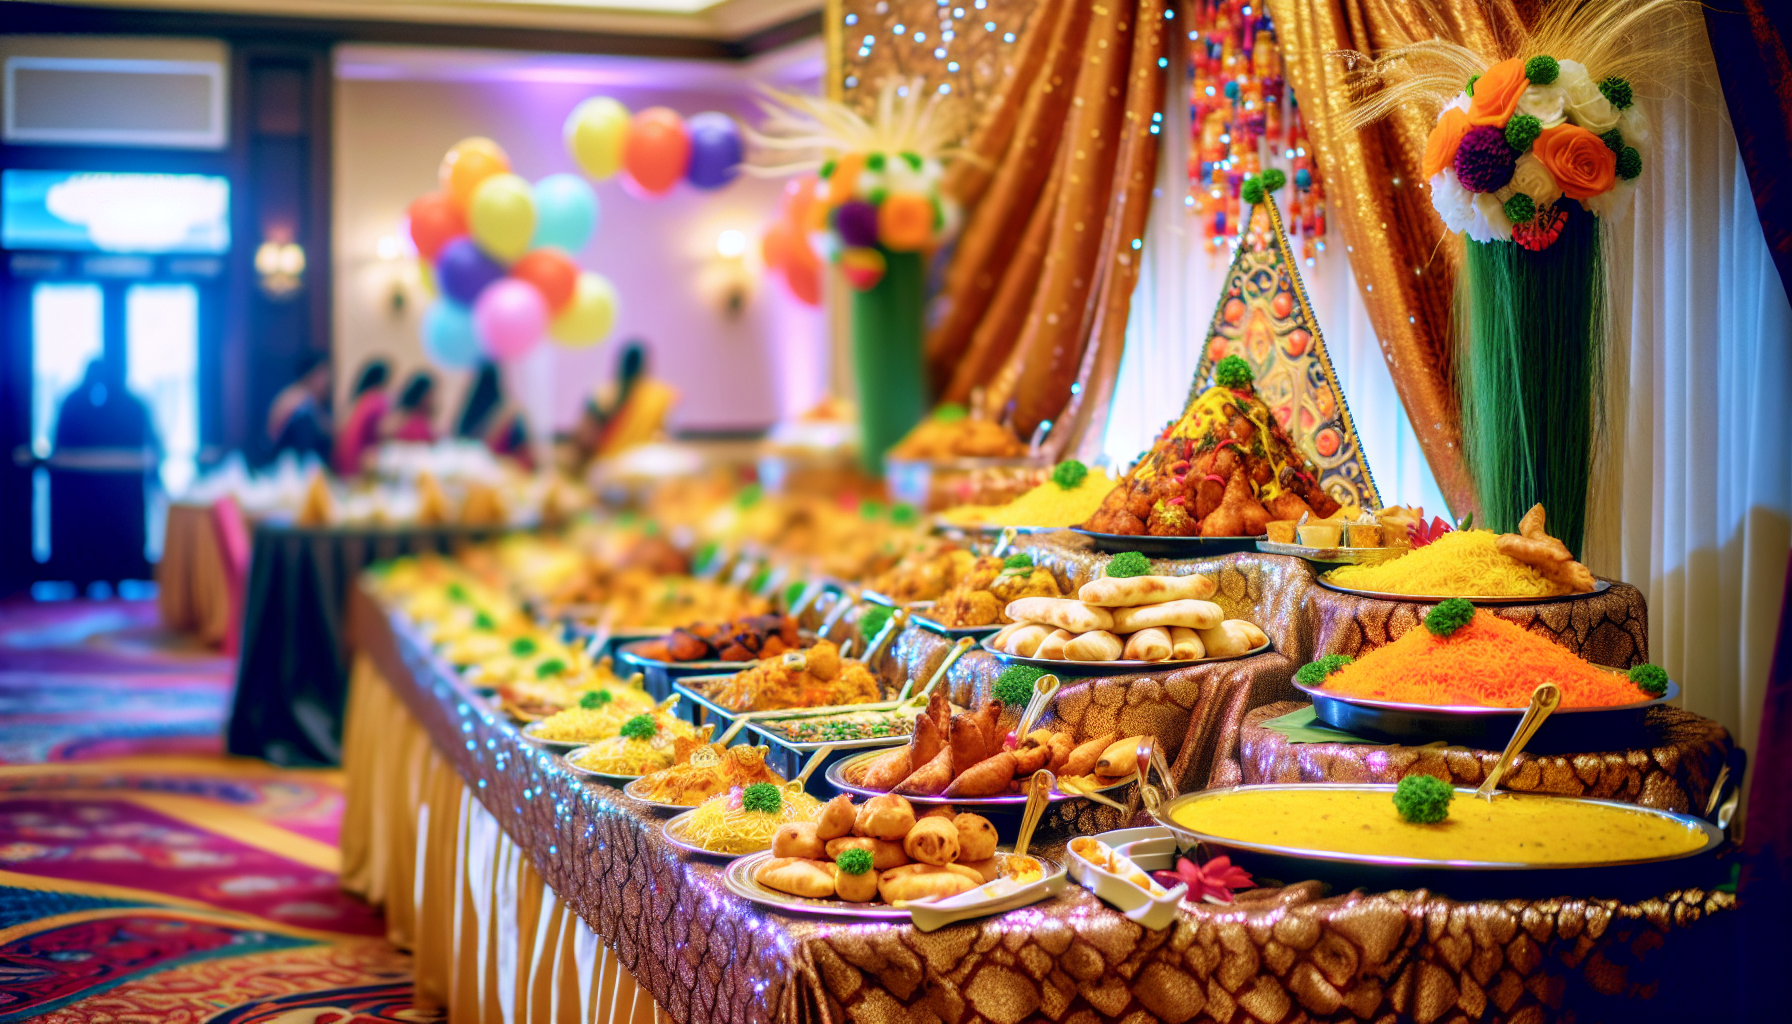 A beautifully decorated Indian buffet with a diverse array of delicious food